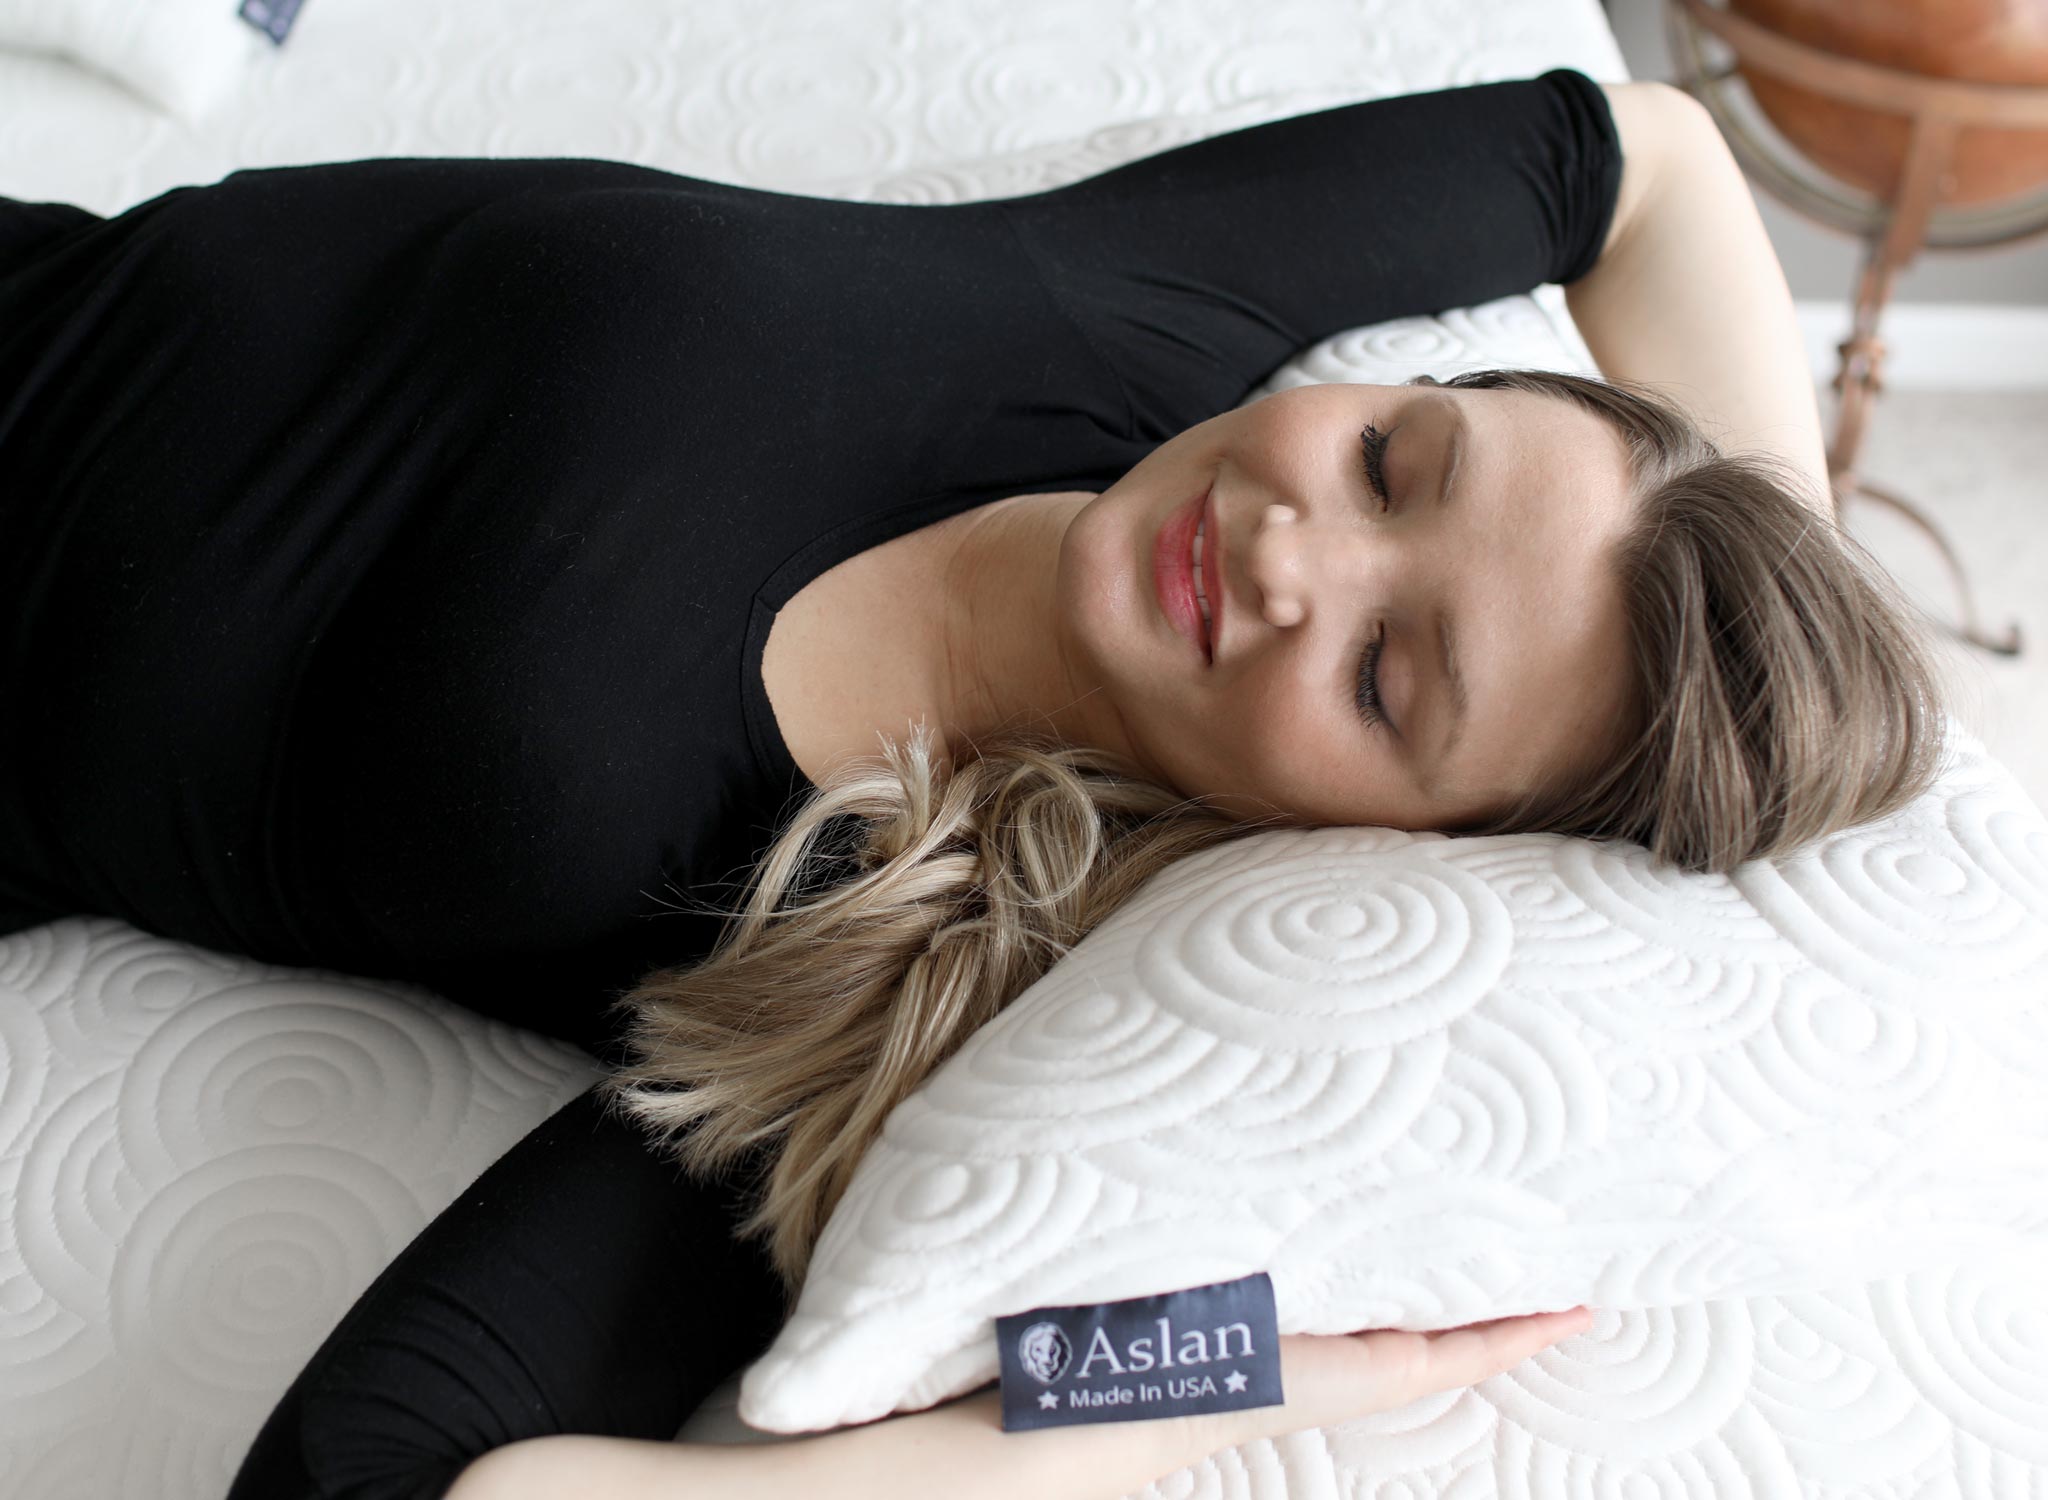 Sealy Adjustable Pillow, Designed for Every Kind of Sleeper